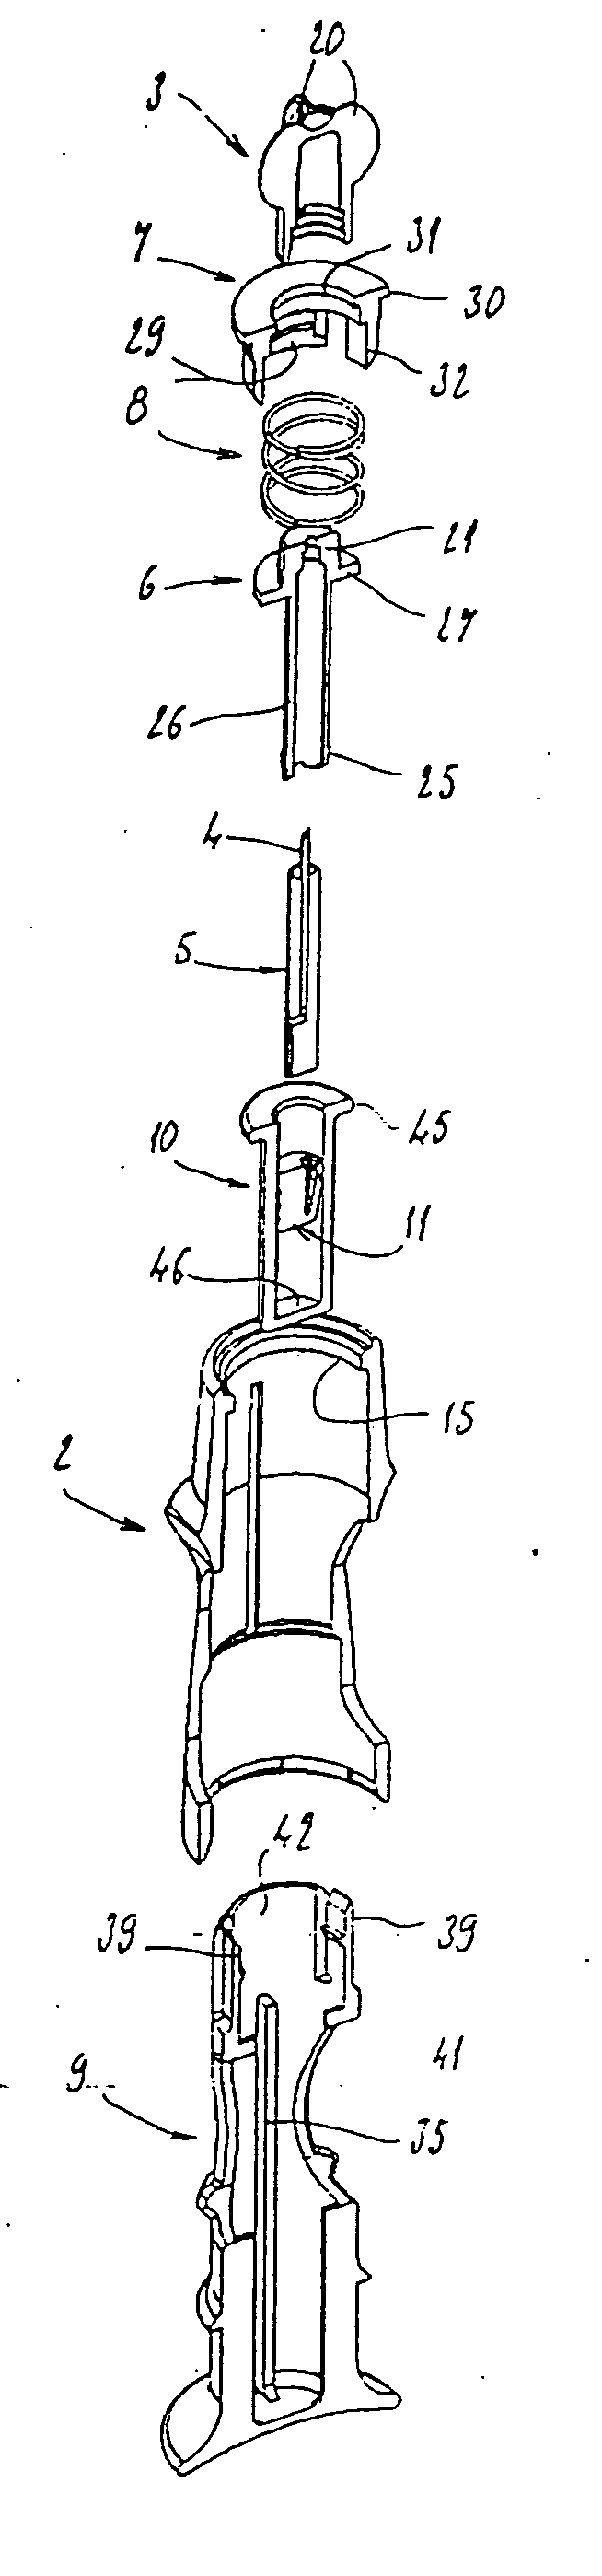 Device for injecting a product, in particular for medical use